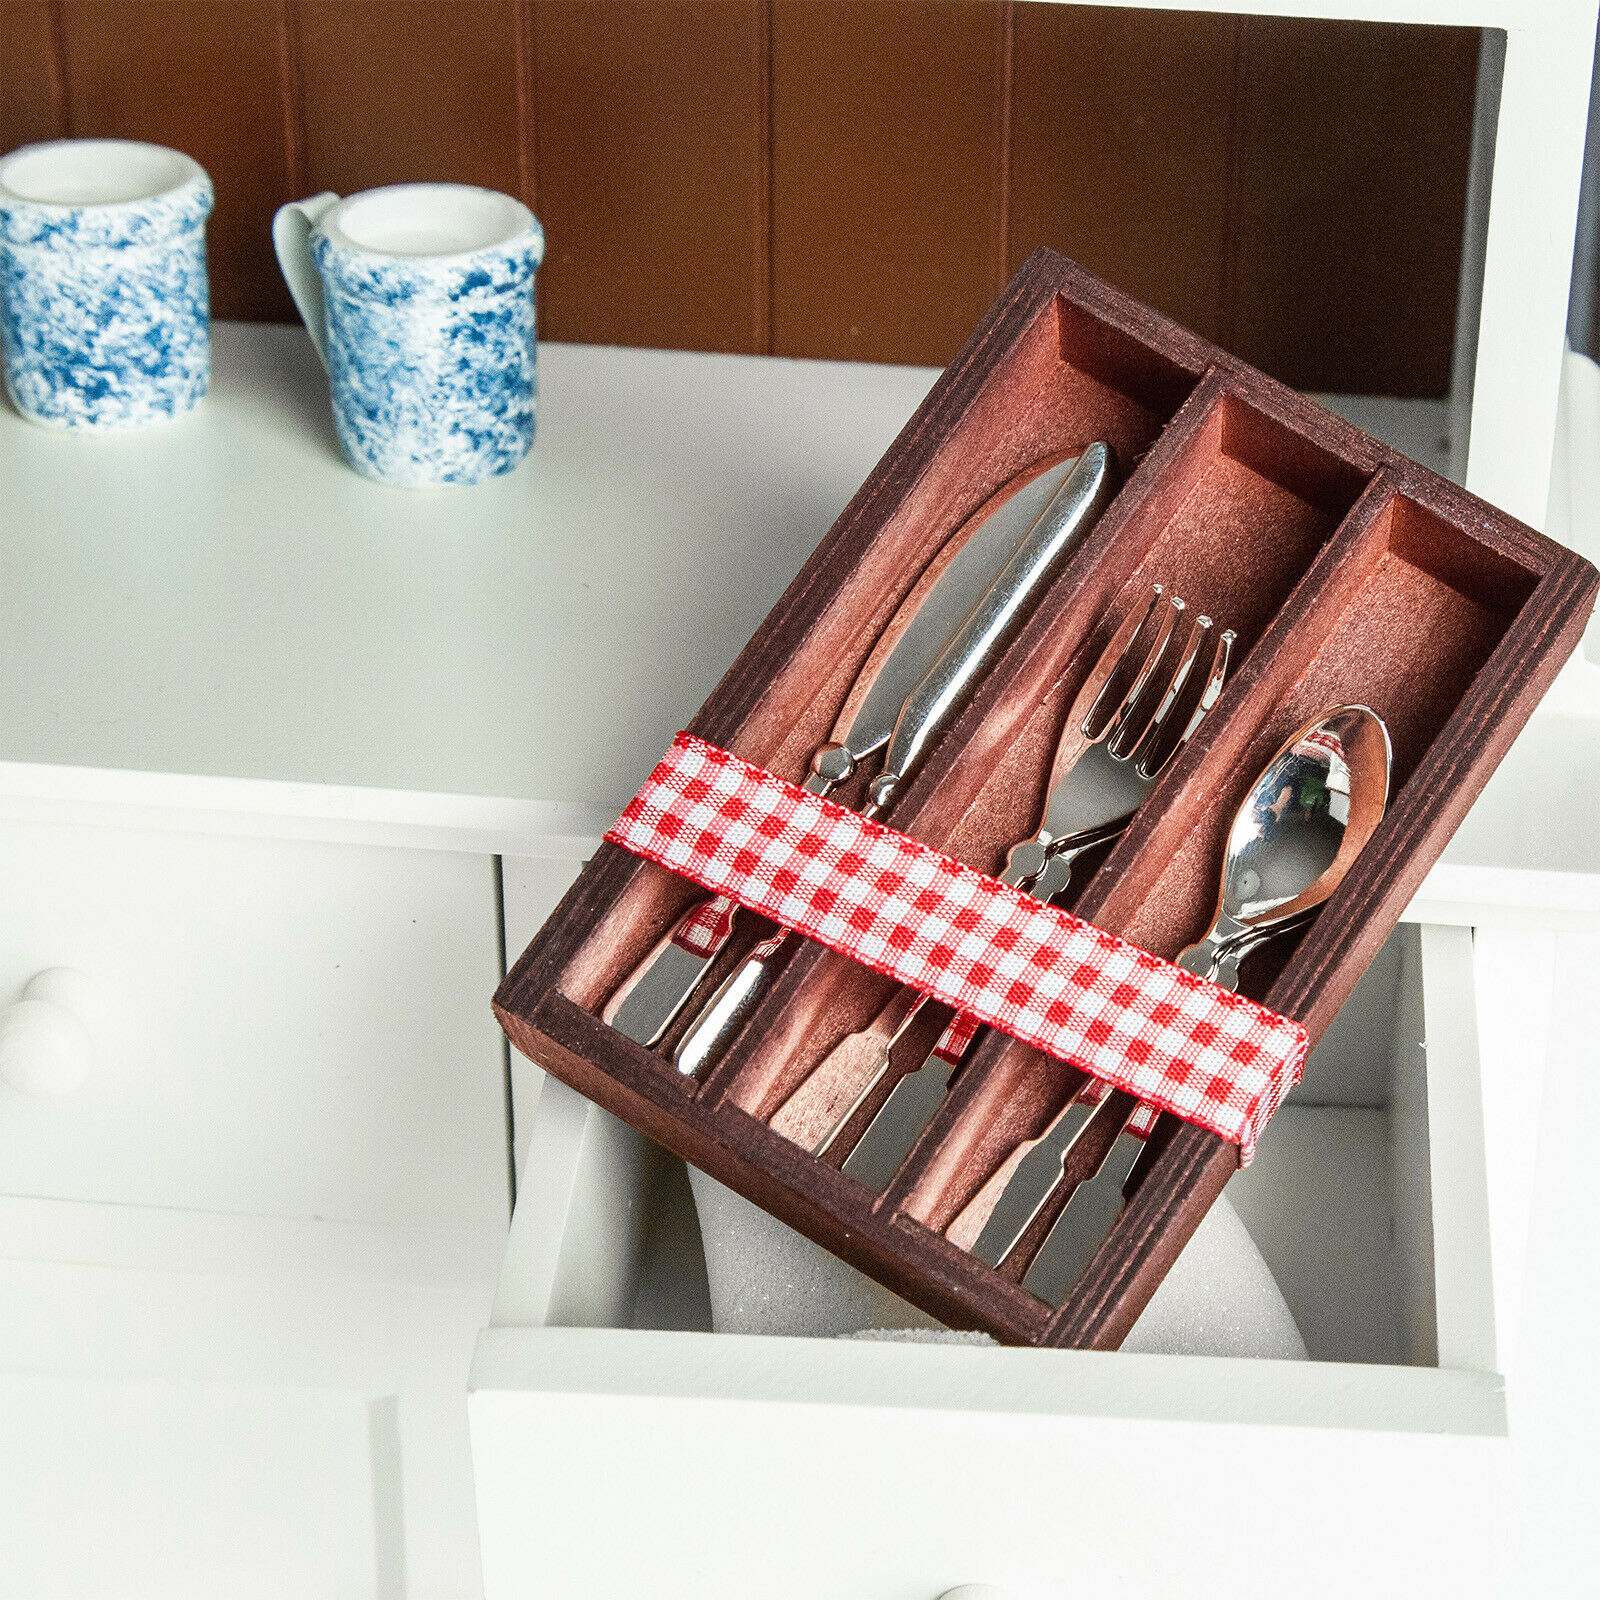 18 In Doll Accessory Flatware Utensil Set,svc For 4 Silver Utensils High Quality